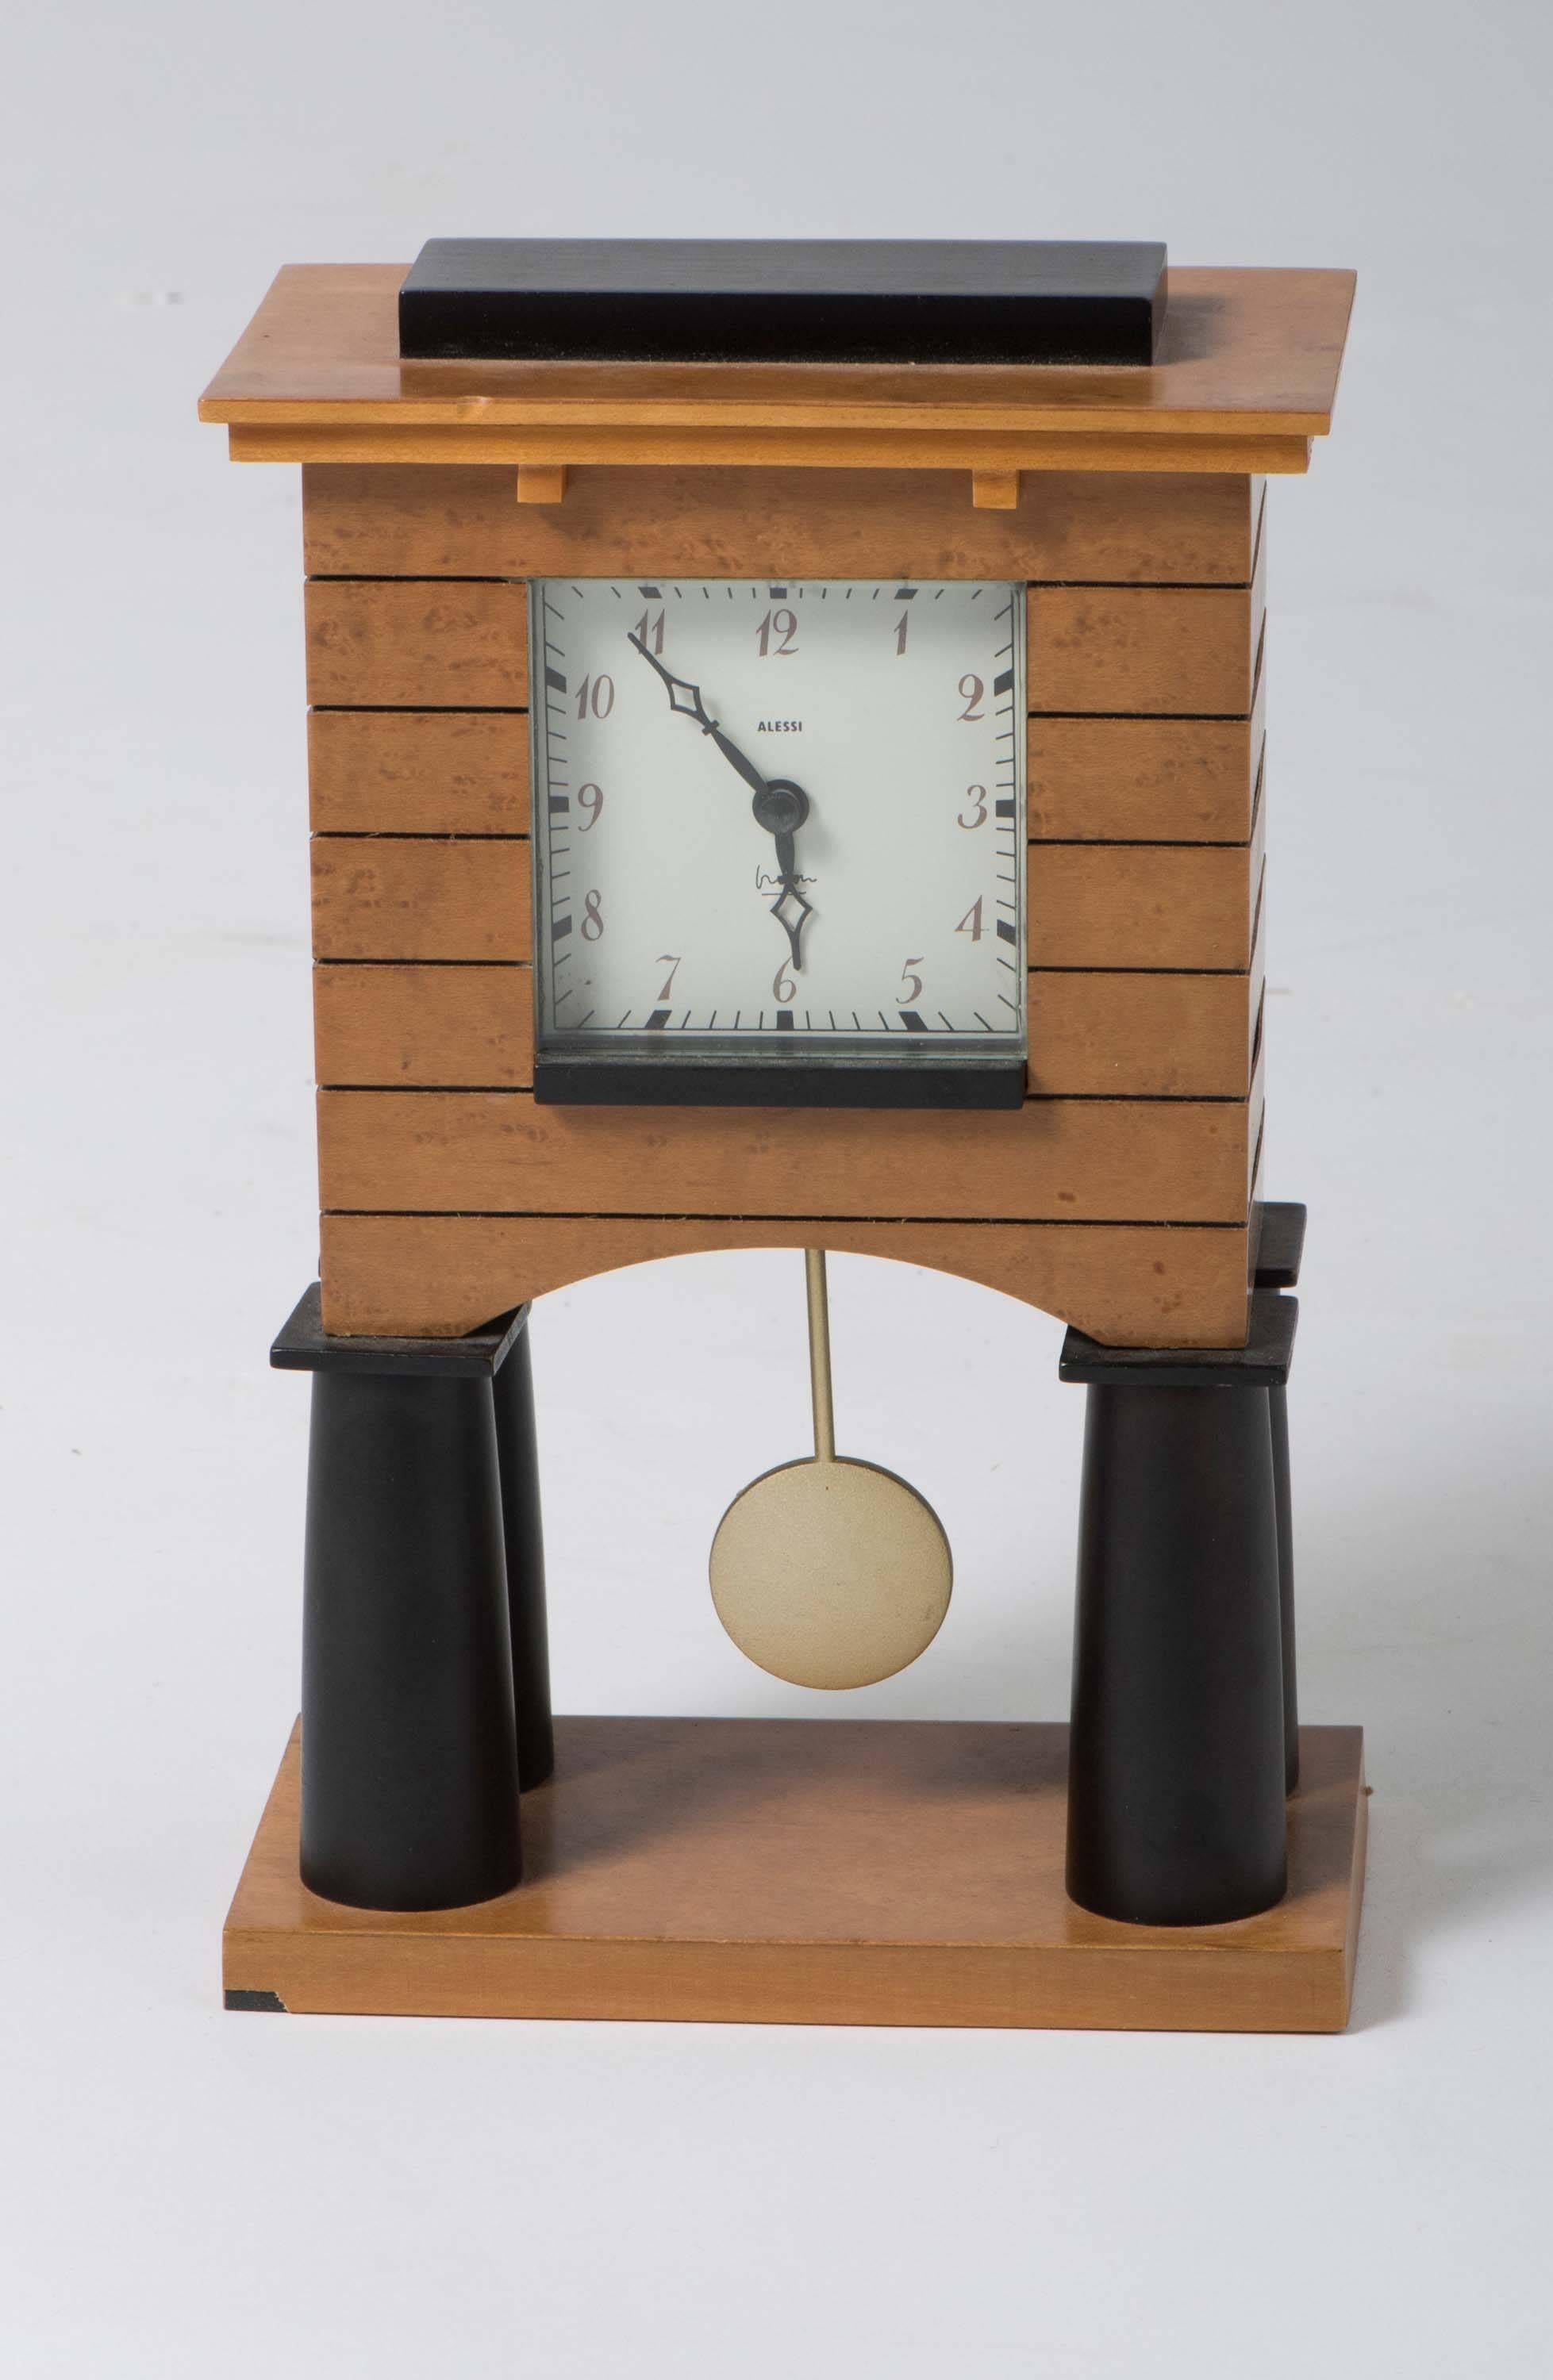 A mantel clock by Michael Graves for Alessi spa.
Birch, glass and metal,
Italy, circa 1988.
Measures: 25 cm high x 16 cm wide x 9 cm deep.
Lit ; Alessi, The Dream Factory, P60.
Design of the 1980s, p.222.
 